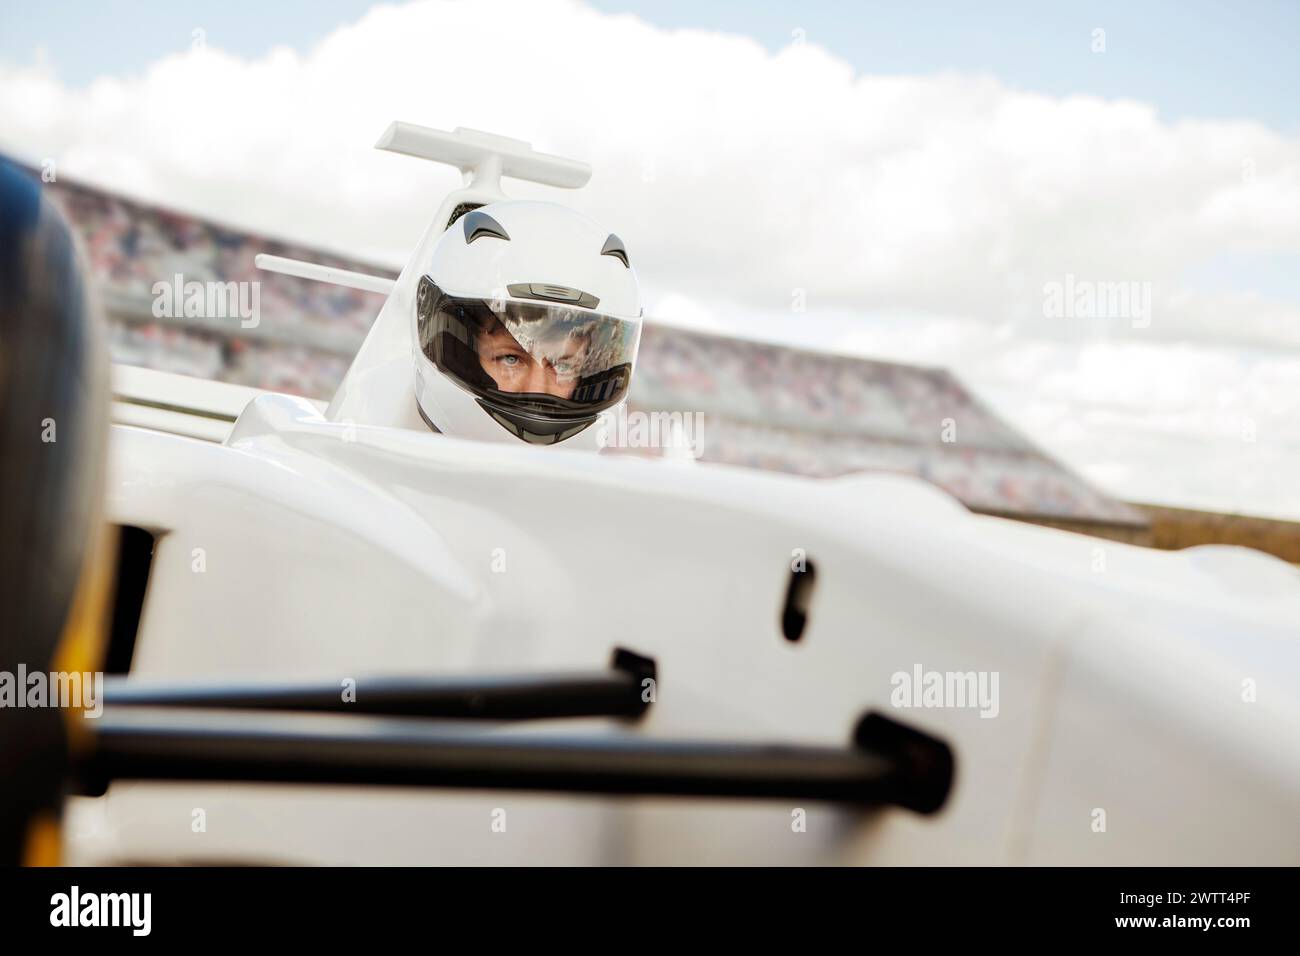 Race car driver focused behind the wheel at the racetrack. Stock Photo